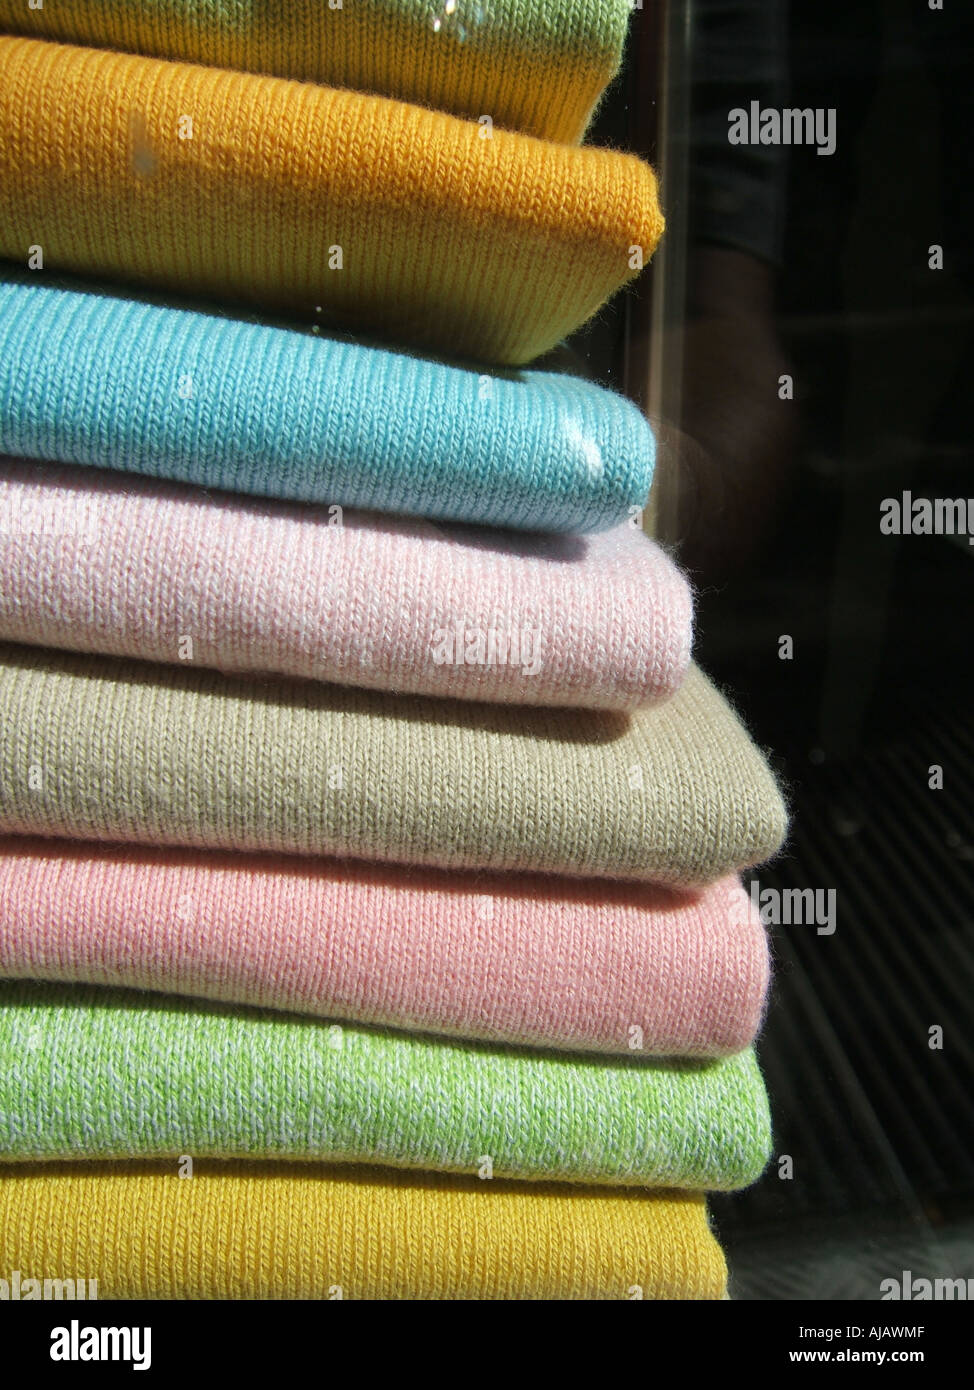 folded pastel coloured cardigans or jumpers Stock Photo